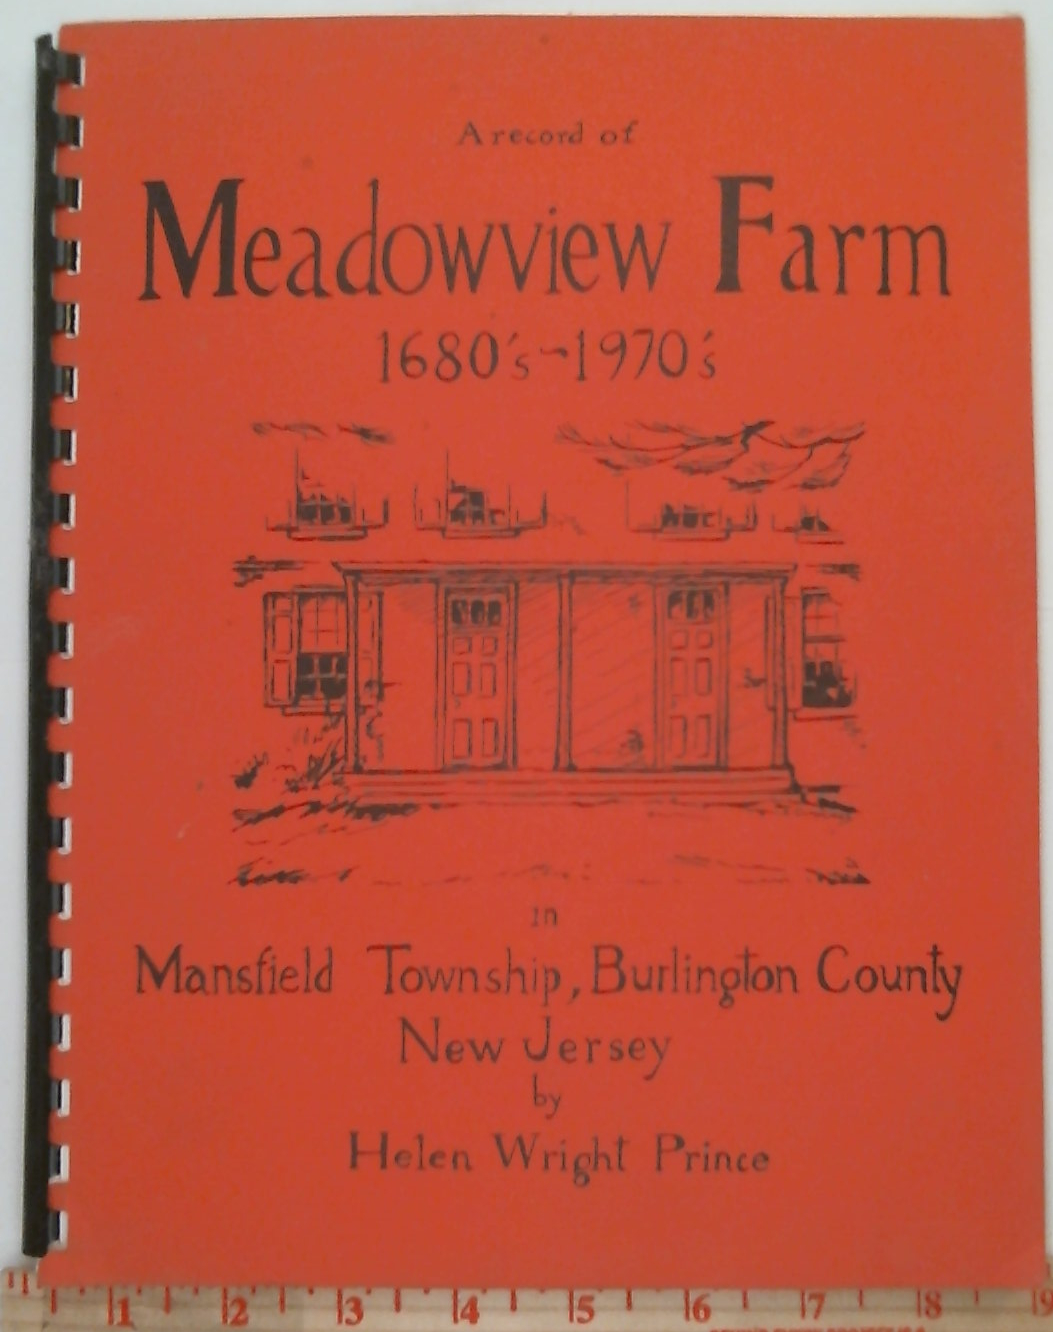 A Record of Meadowview Farm 1680